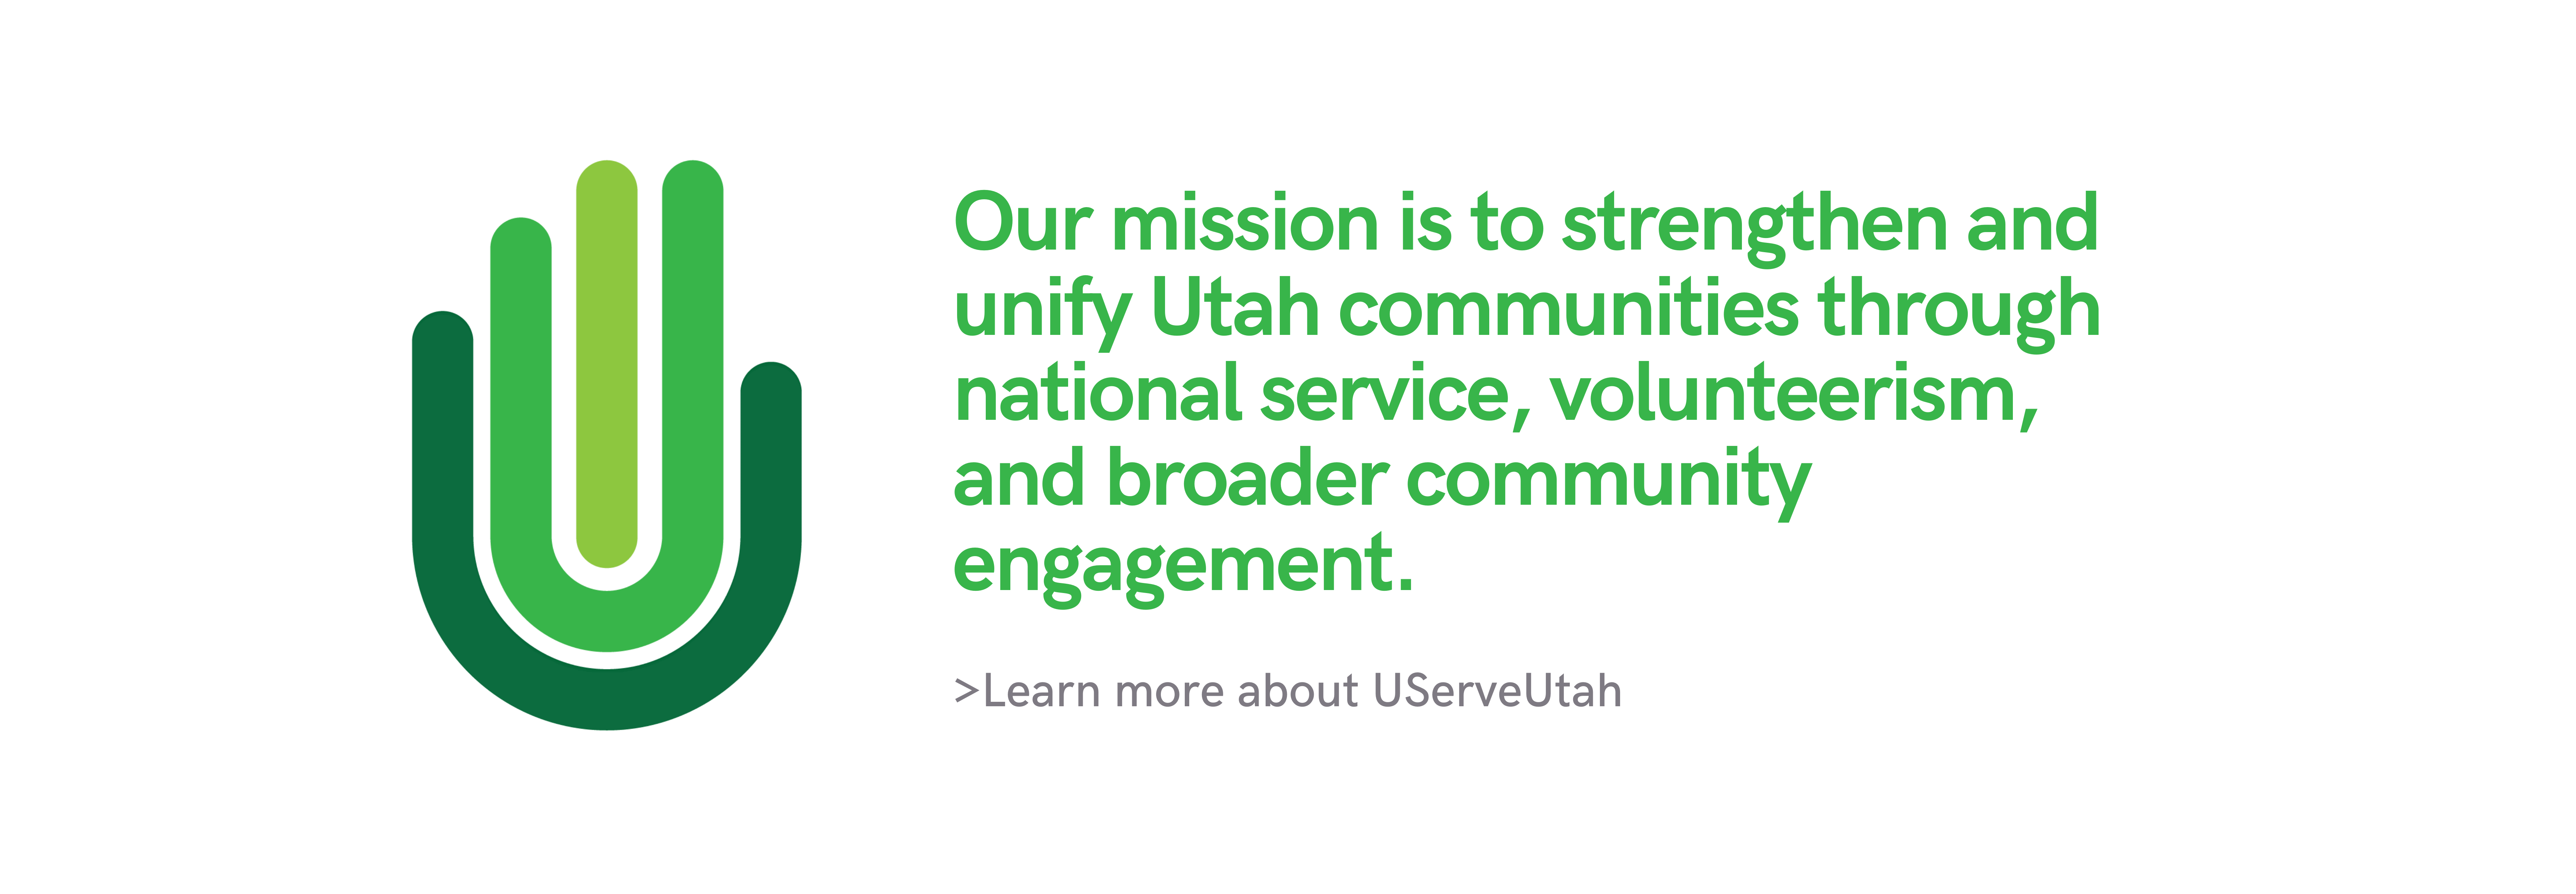 Our mission is to strengthen and unify Utah communities through national service, volunteerism, and broader community engagement. >Learn more about UServeUtah